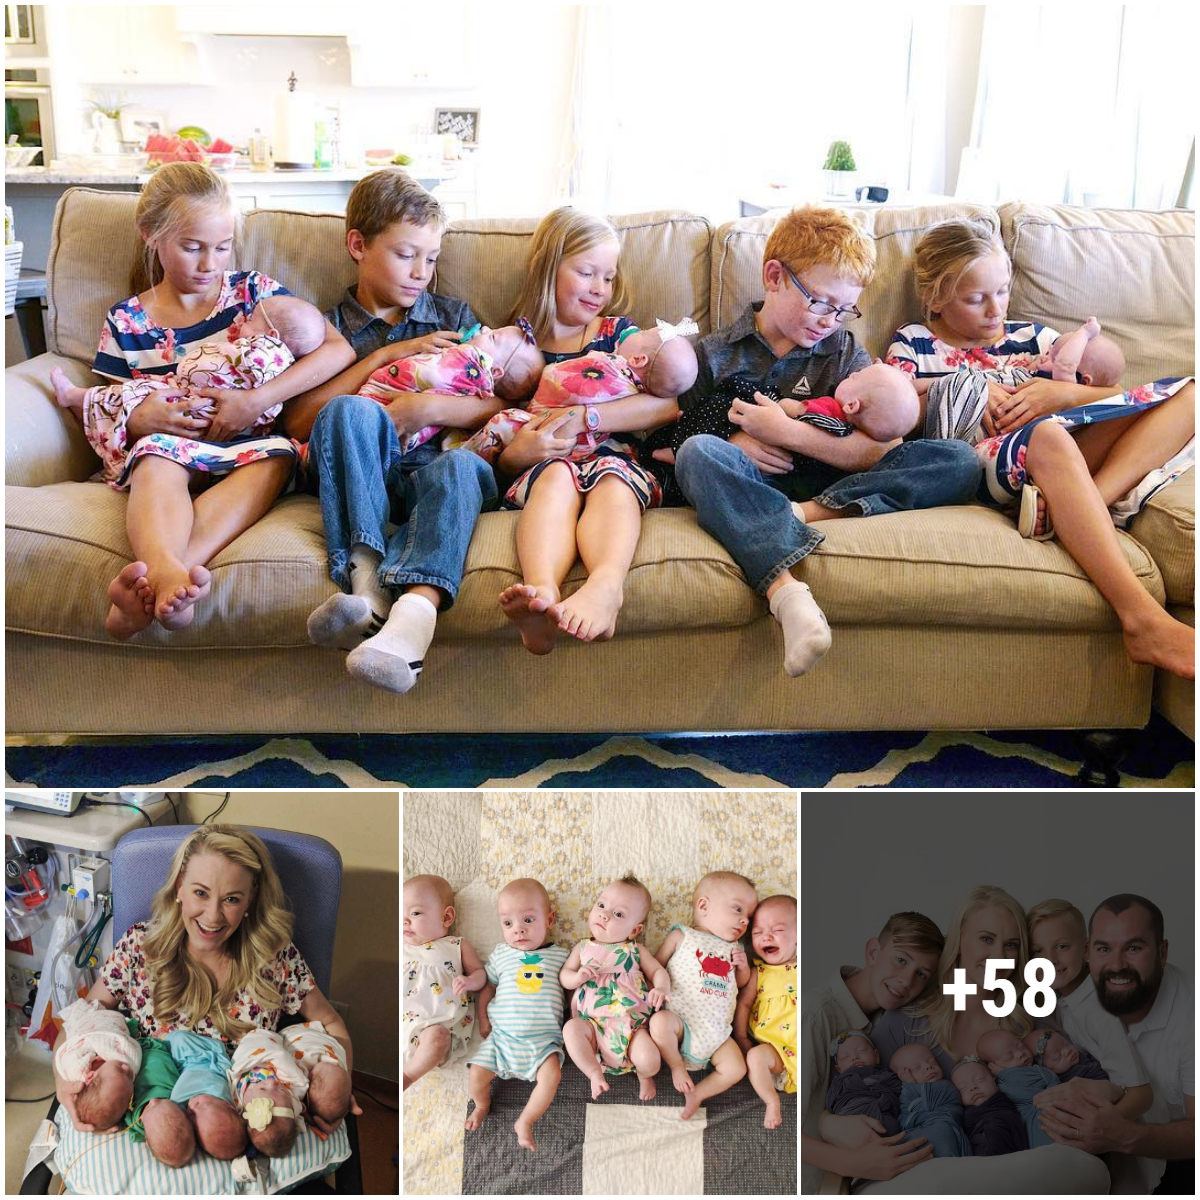 Dreams come true: Utah mother’s five miracle children bring happiness after years of despair